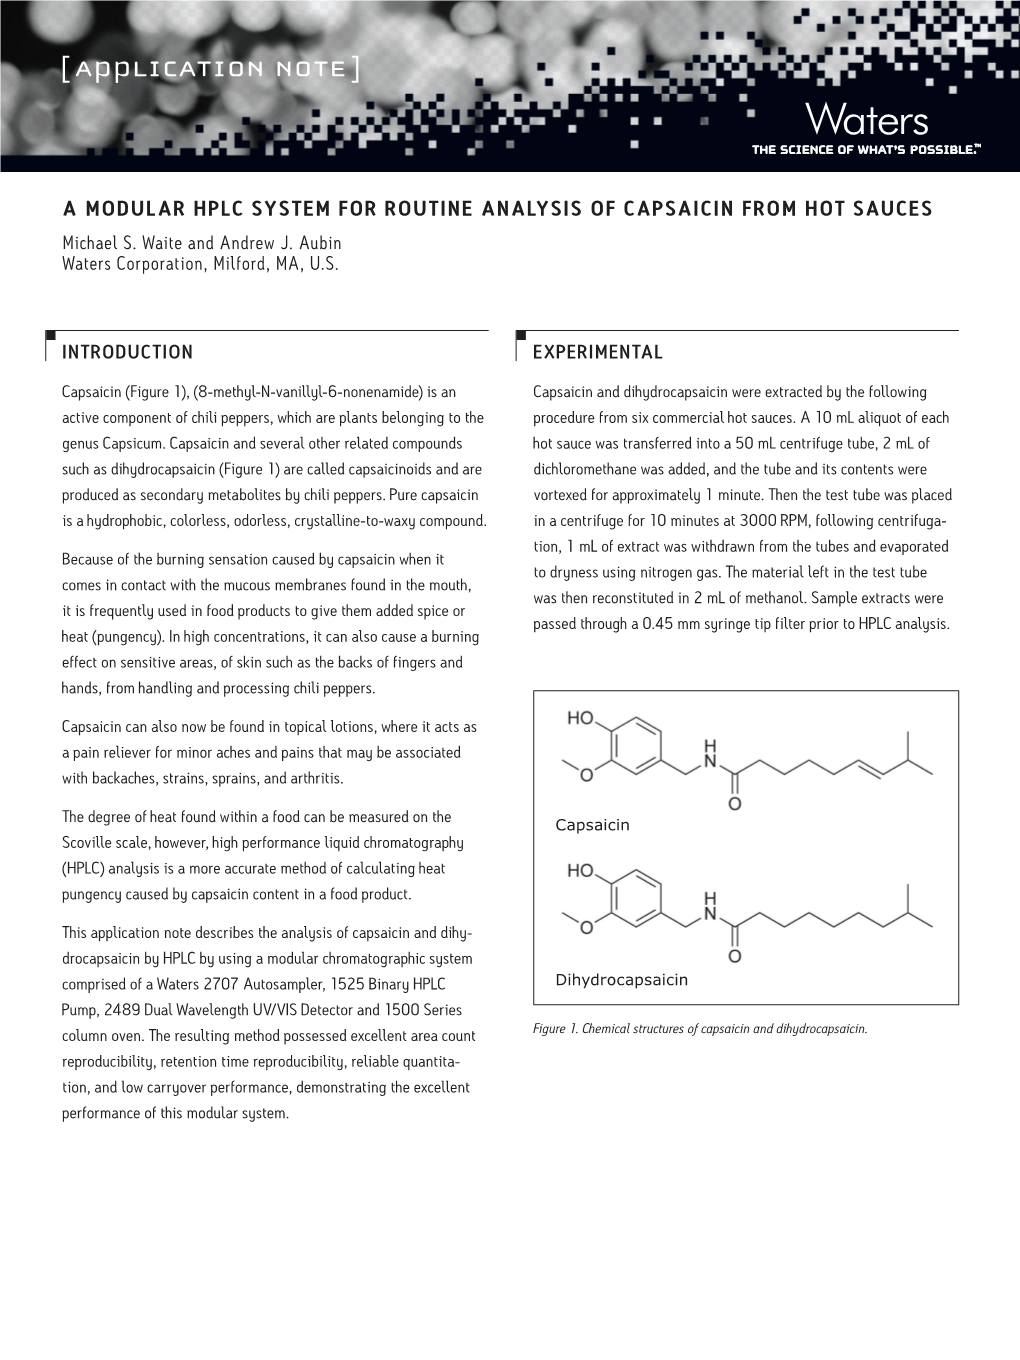 A Modular HPLC System for Routine Analysis of Capsaicin from Hot Sauces Michael S